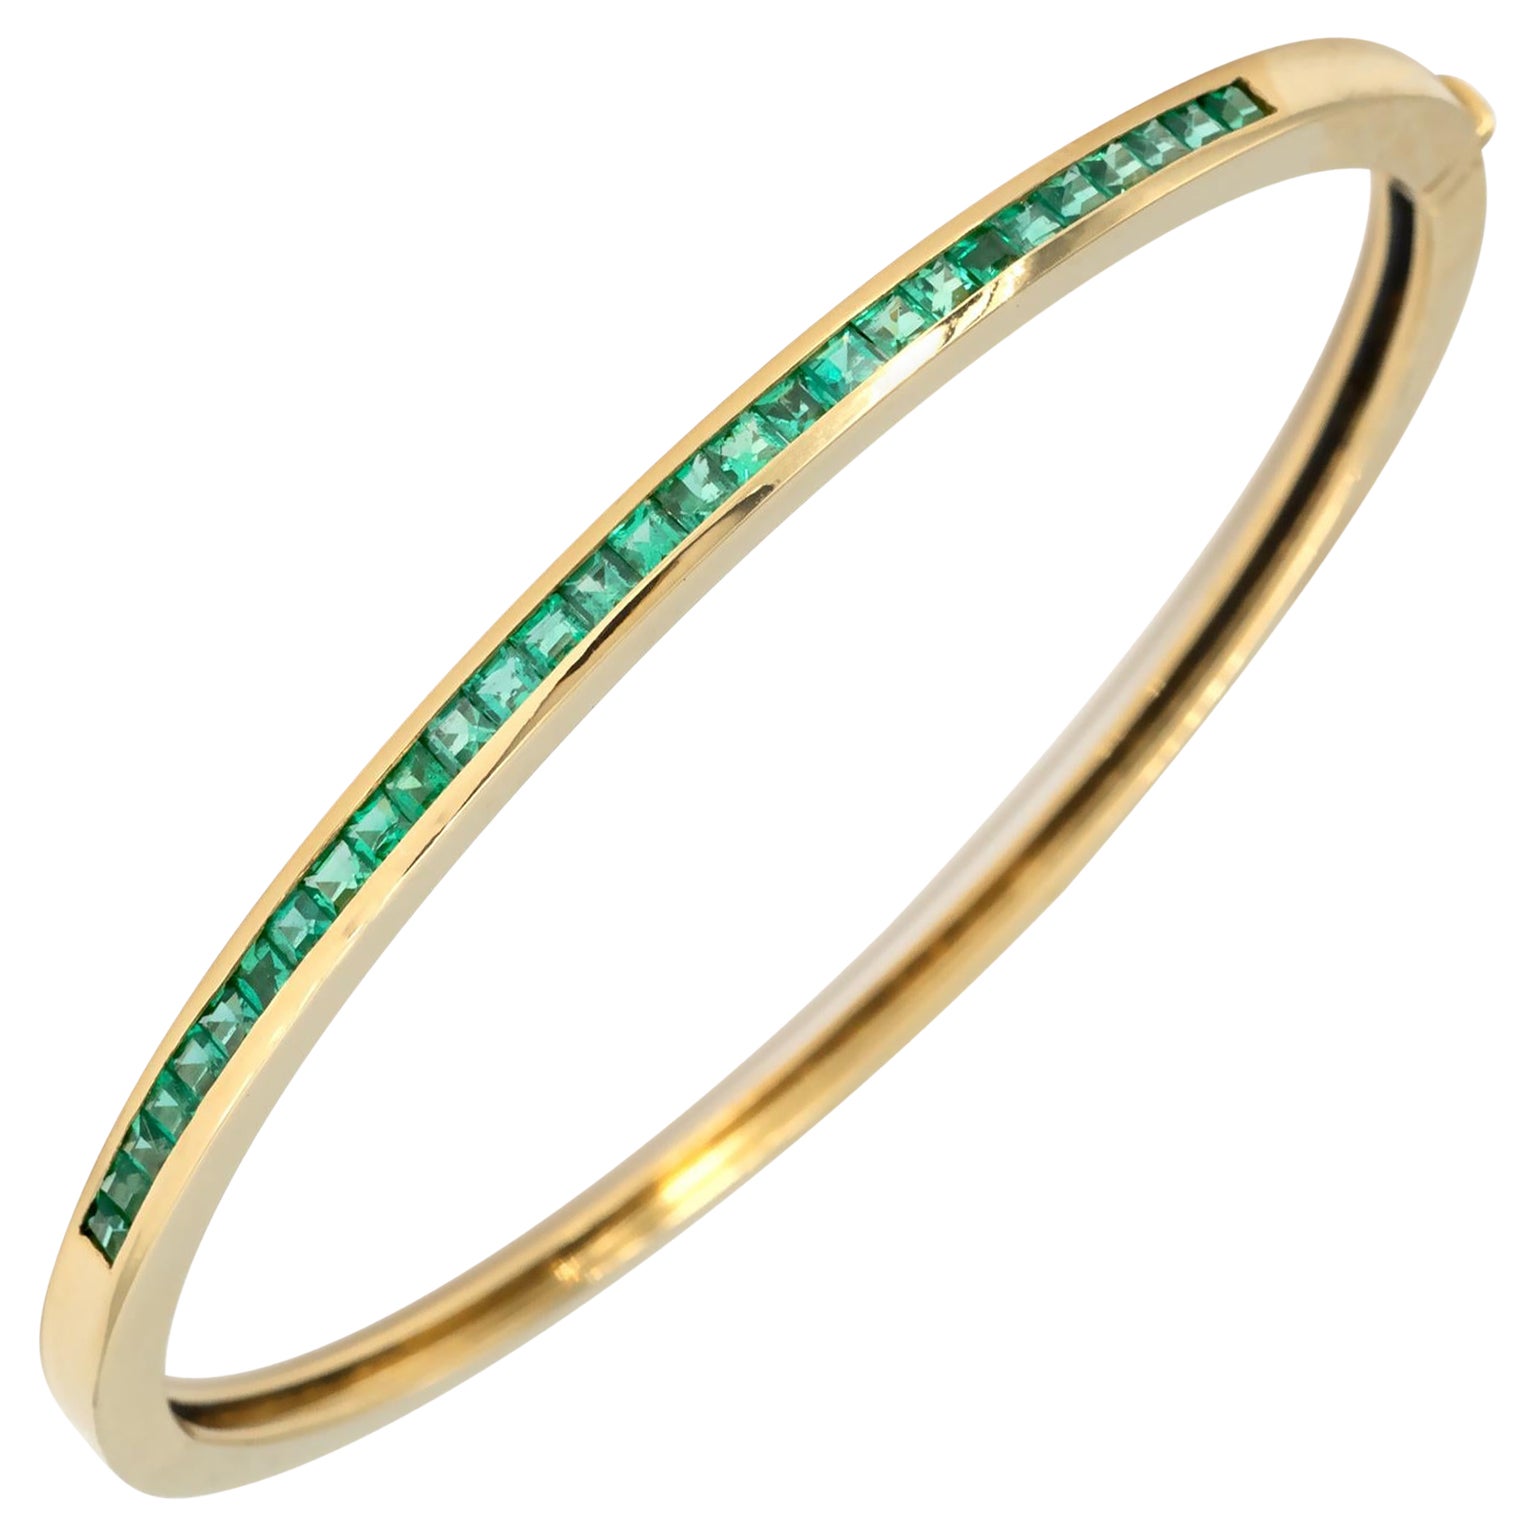 18 Kt Yellow Gold and Square Emerald Hinged Bangle Bracelet